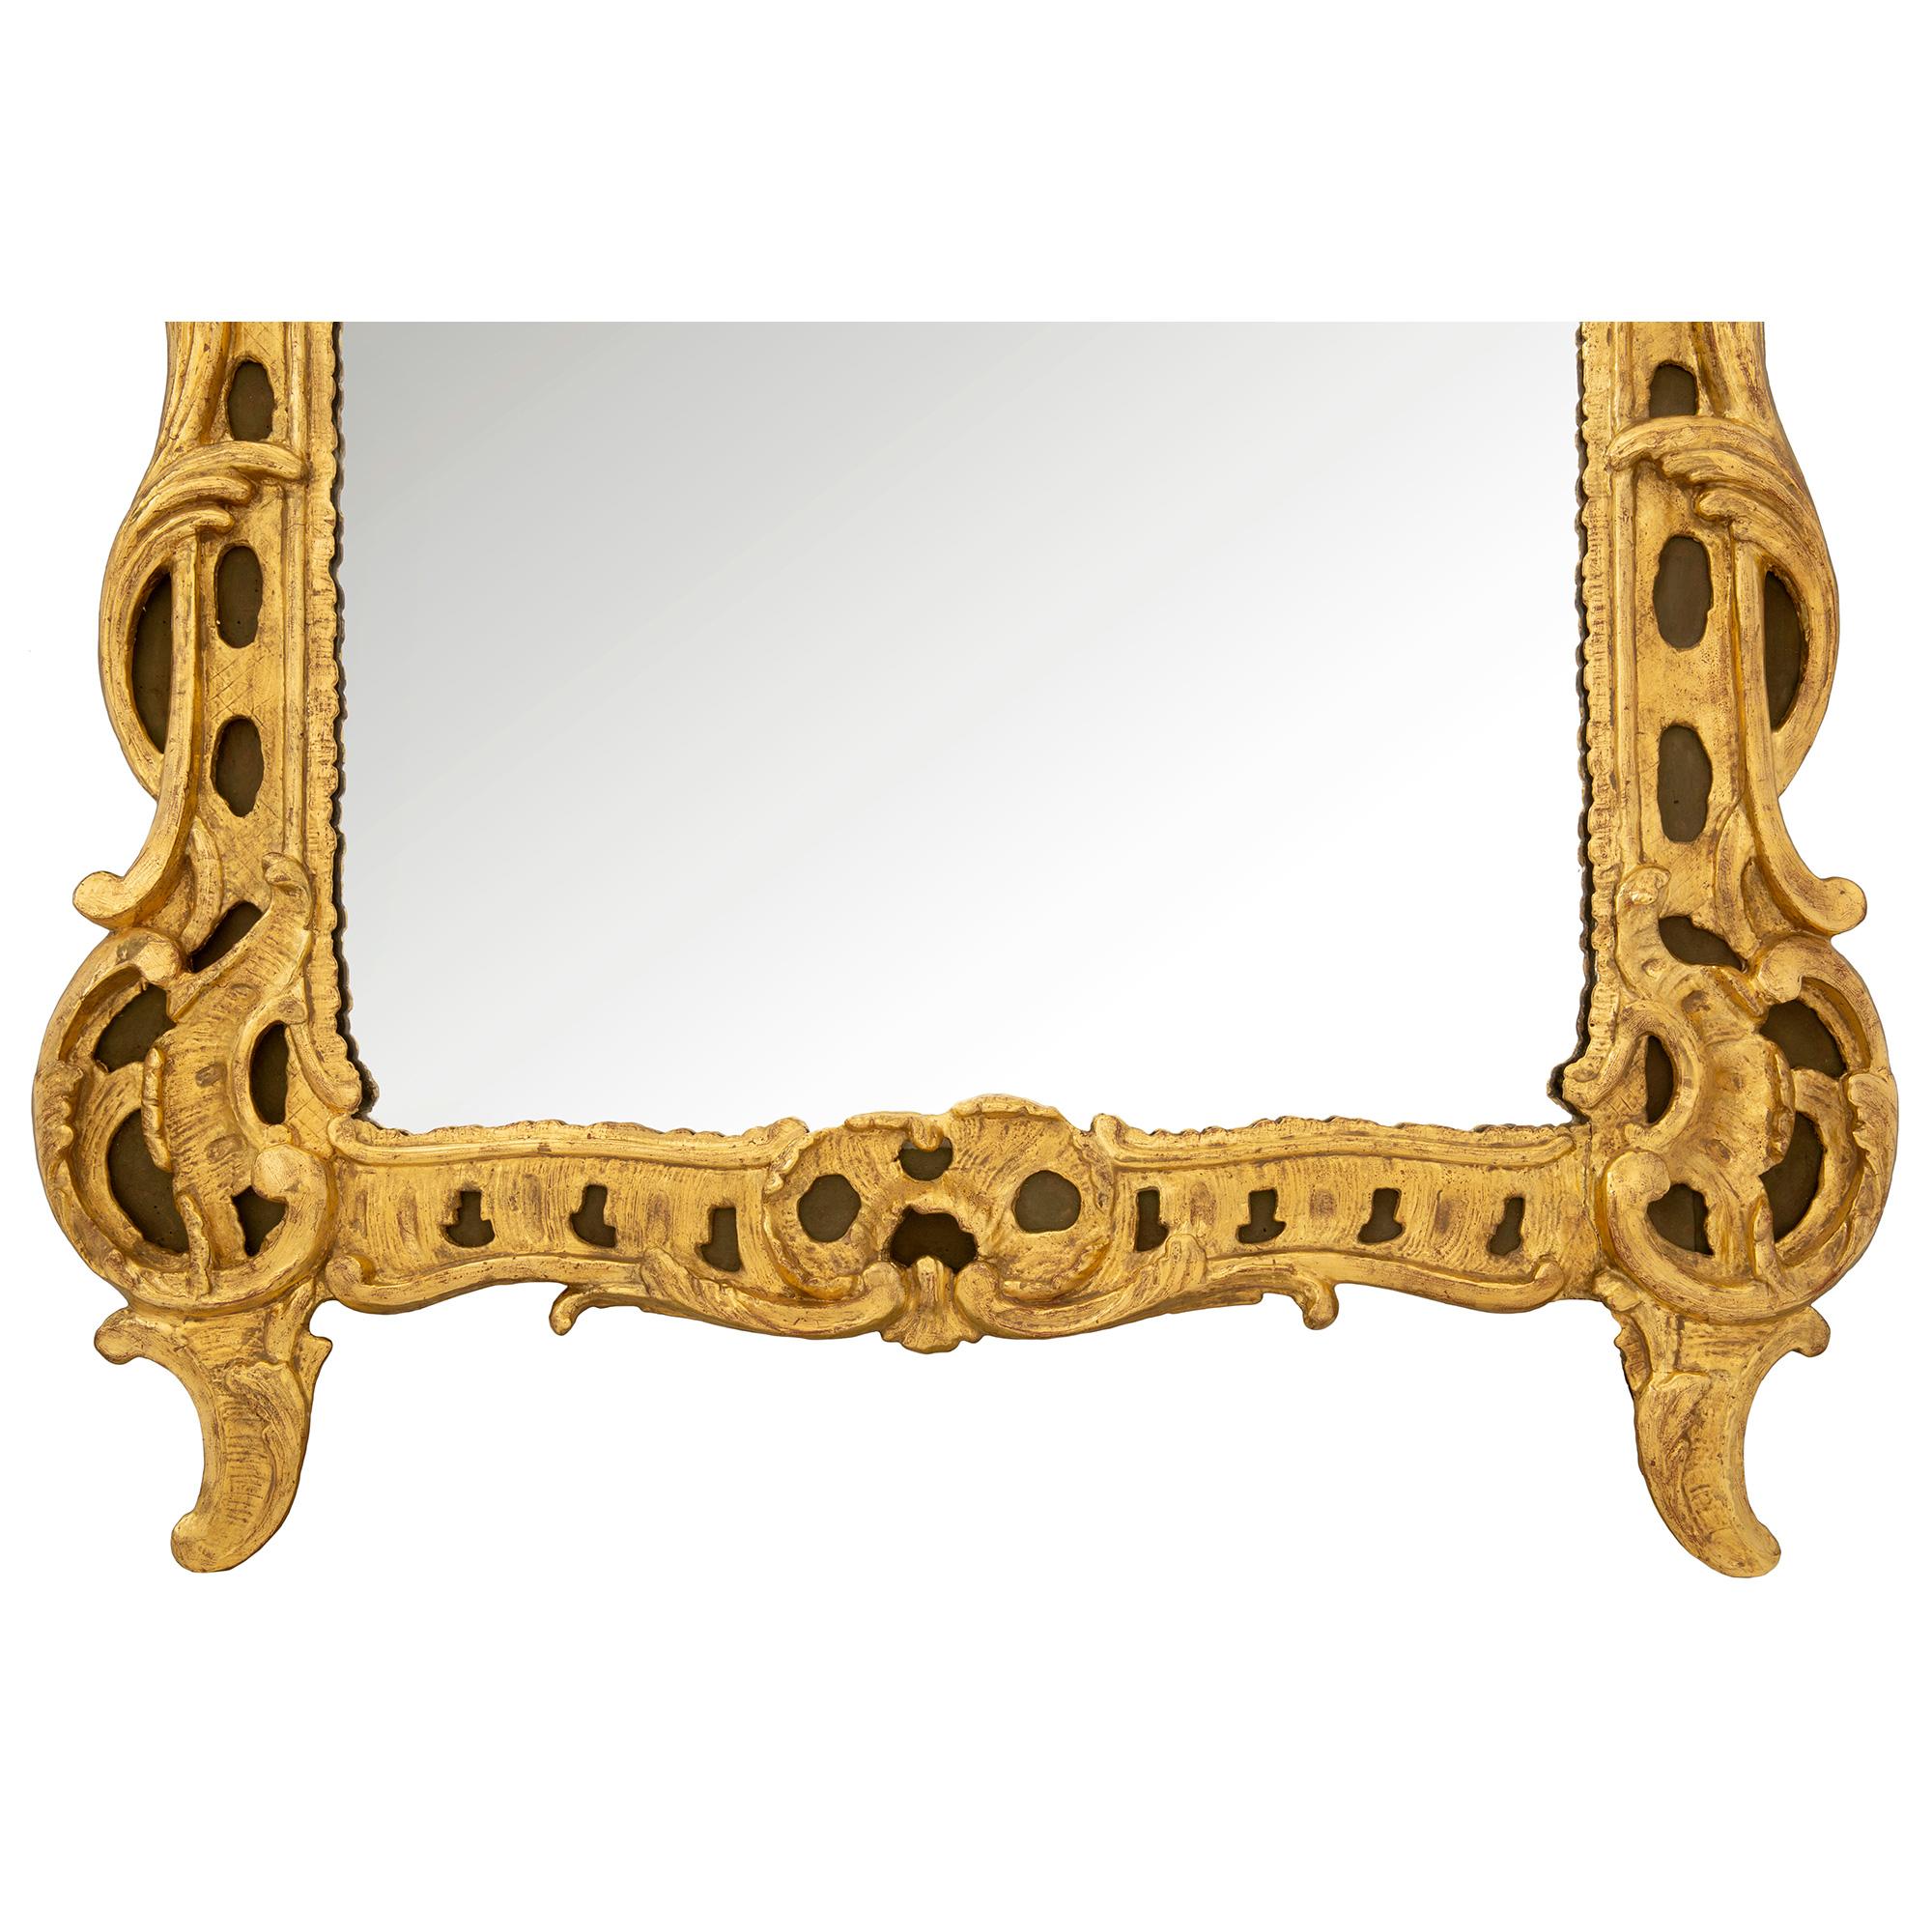 French 18th Century Régence Period Giltwood Mirror For Sale 3